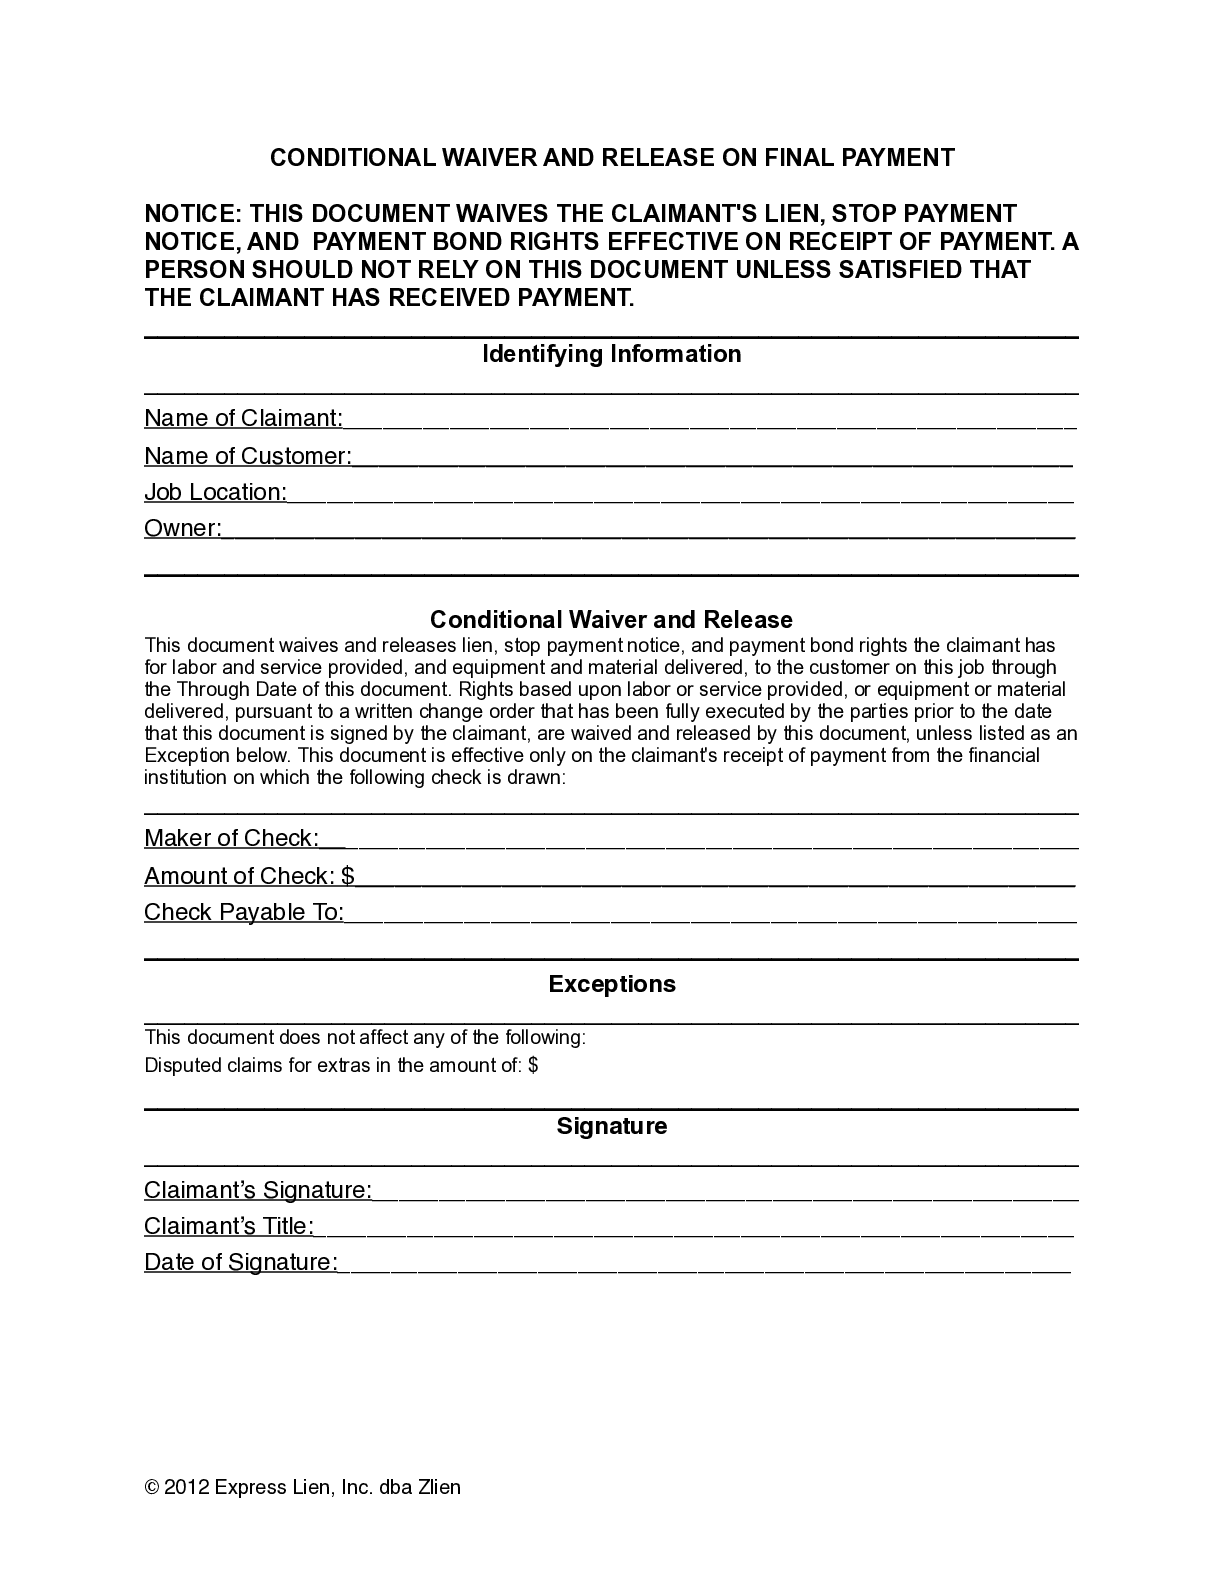 Washington Final Conditional Lien Waiver Form - free from